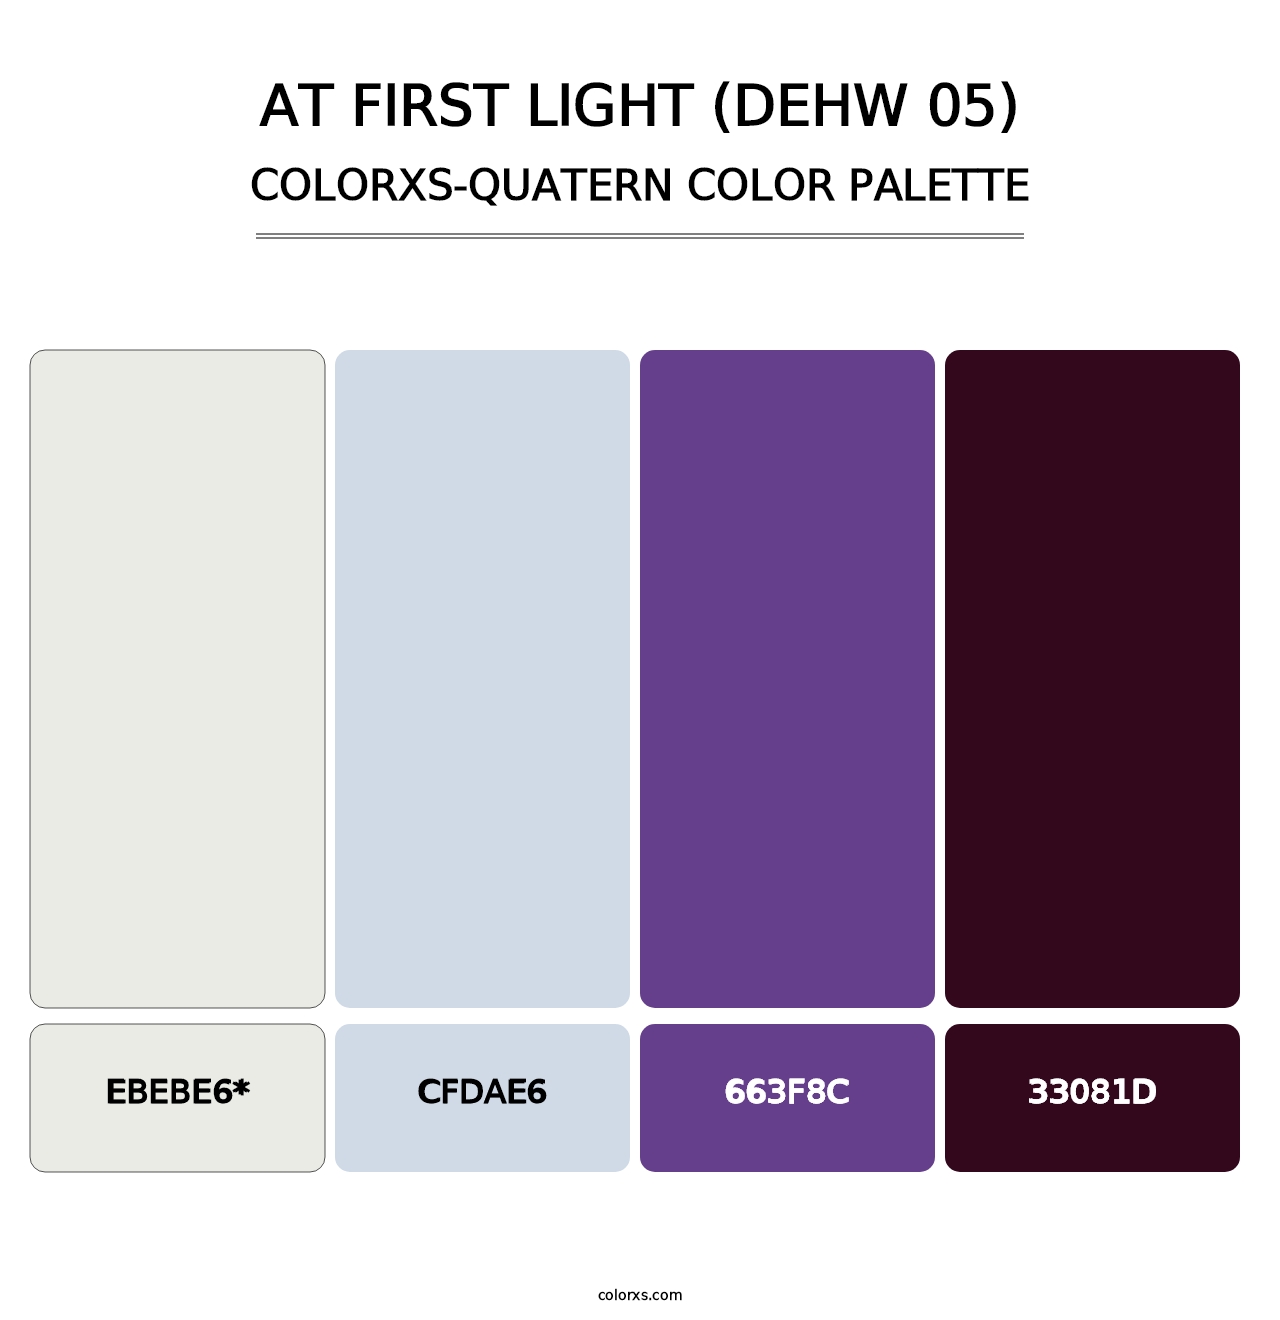 At First Light (DEHW 05) - Colorxs Quatern Palette